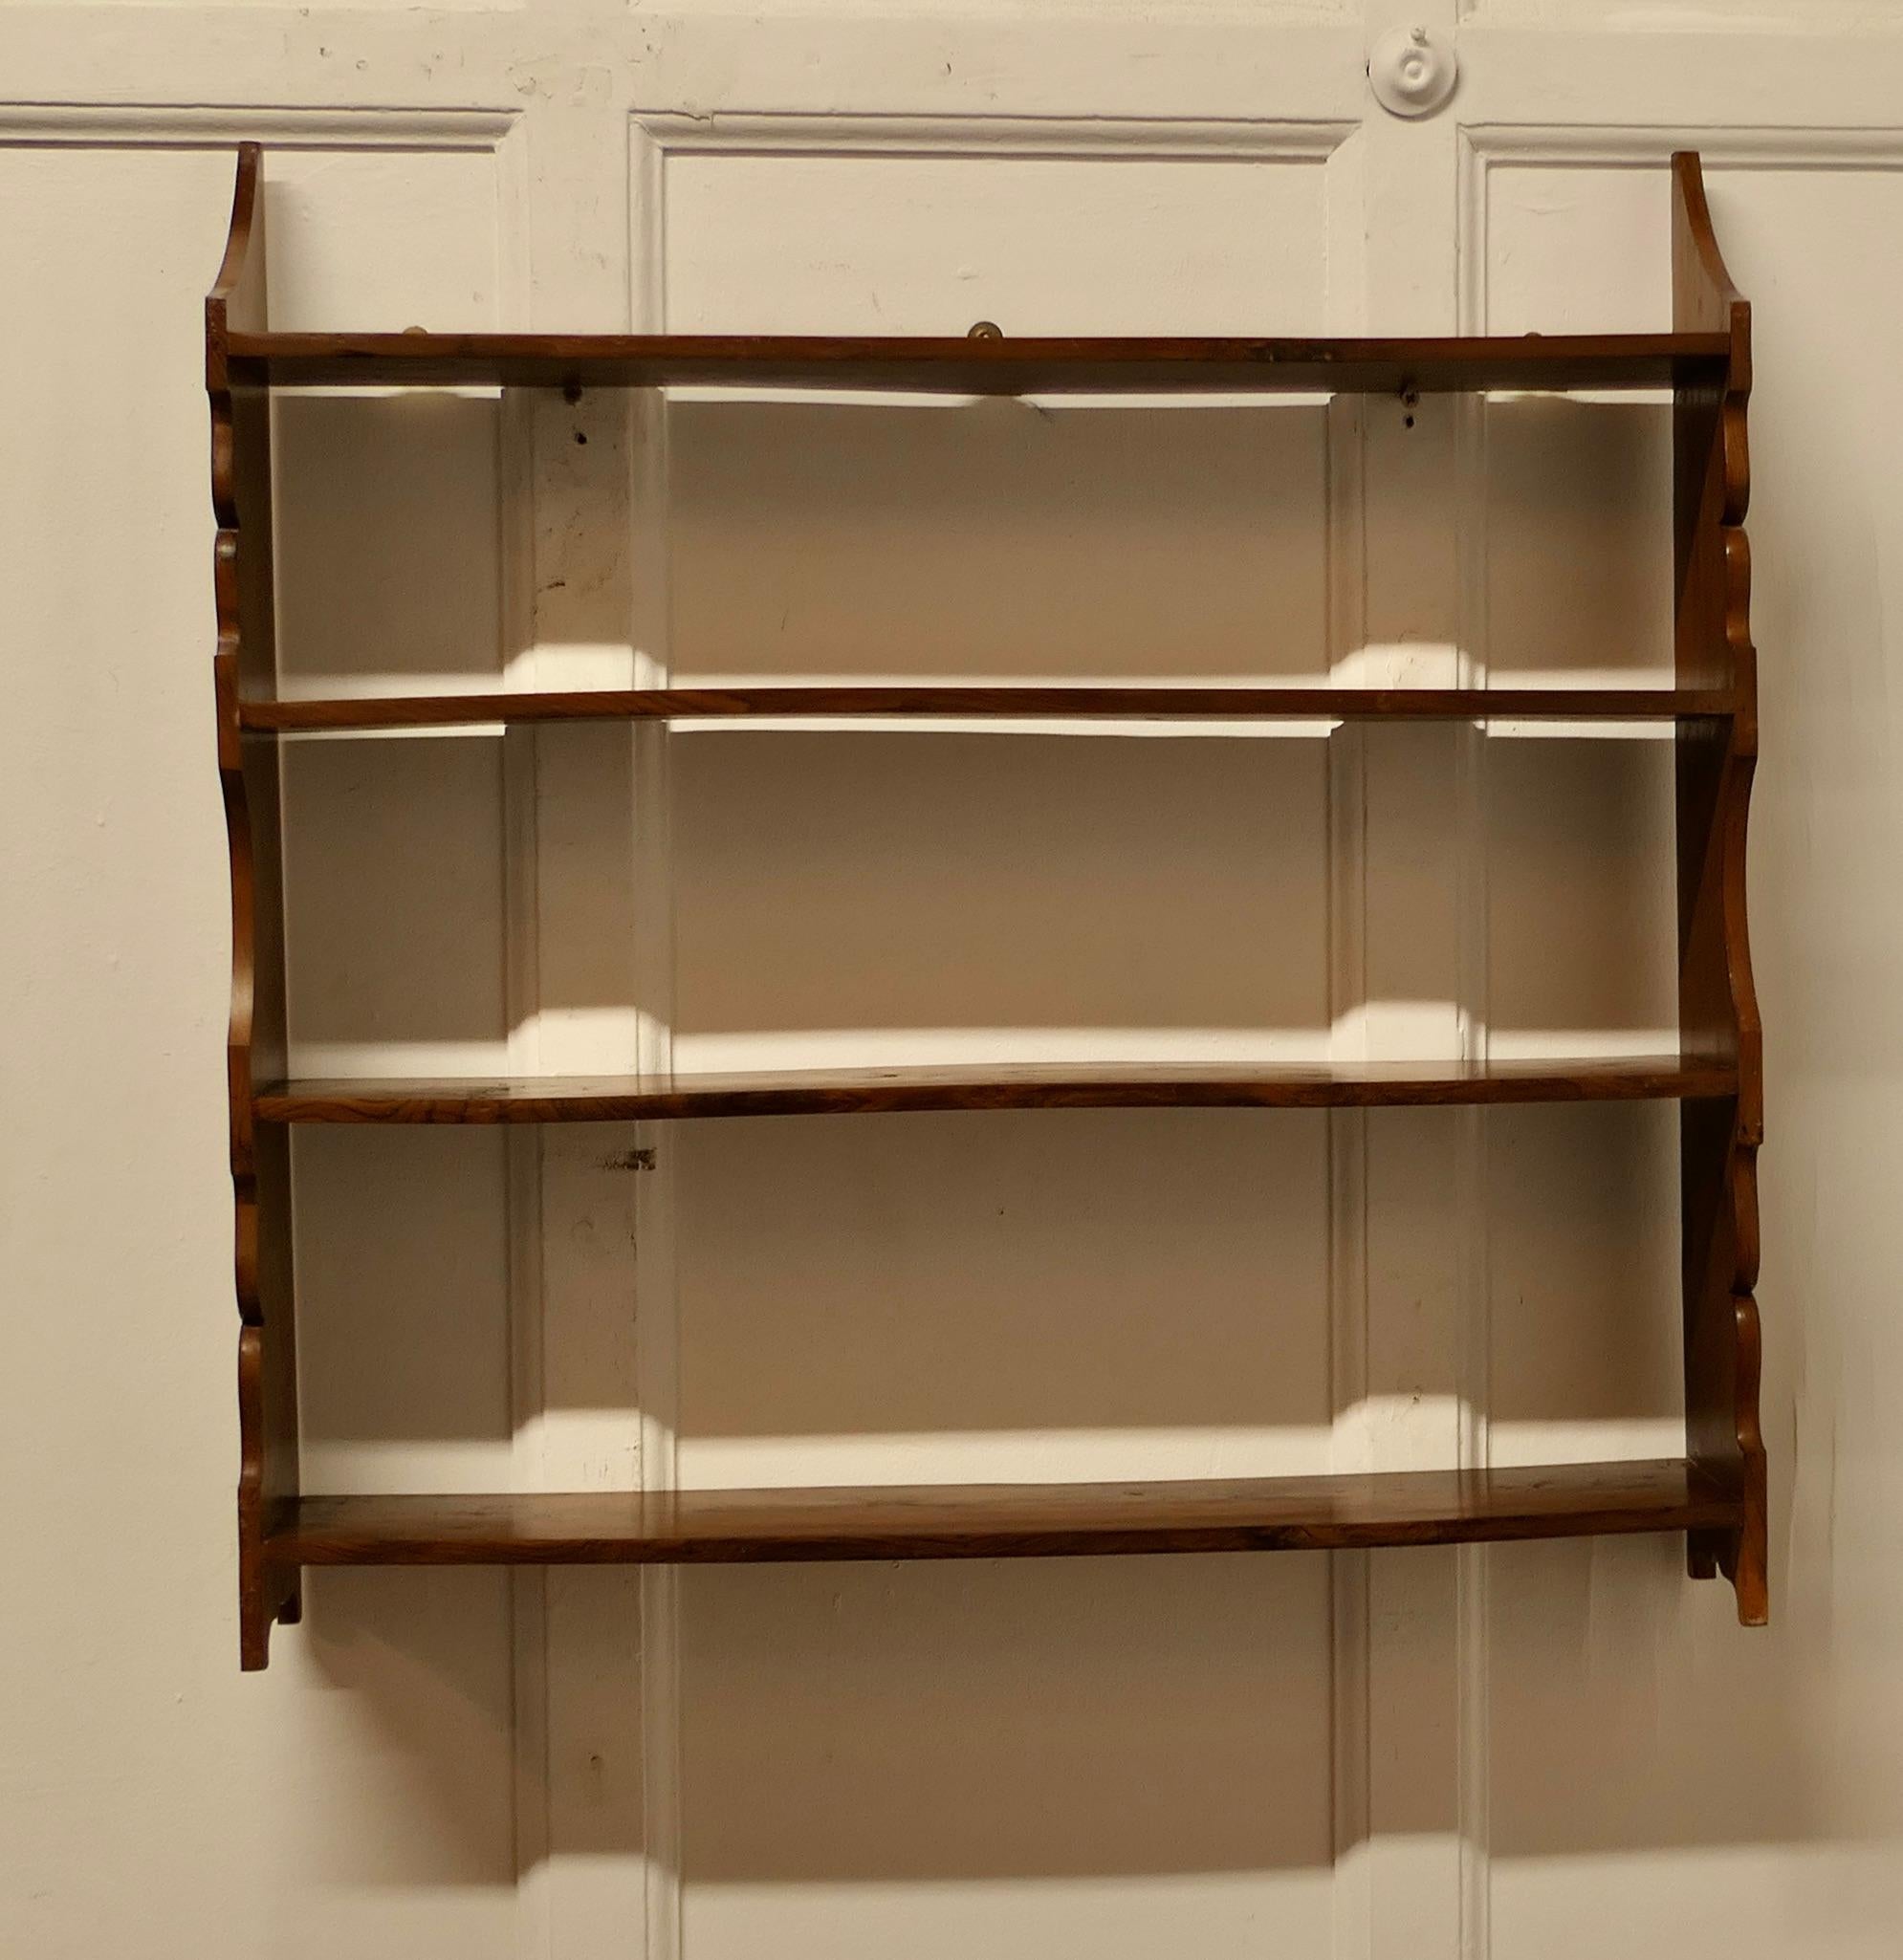 Arts and Crafts Open Front Wall Hanging Yew Bookshelf

This superb quality bookcase has 4 open shelves and a carved decoration along each side edge
The bookcase is in good attractive and sturdy condition and would work very well in your Living room,